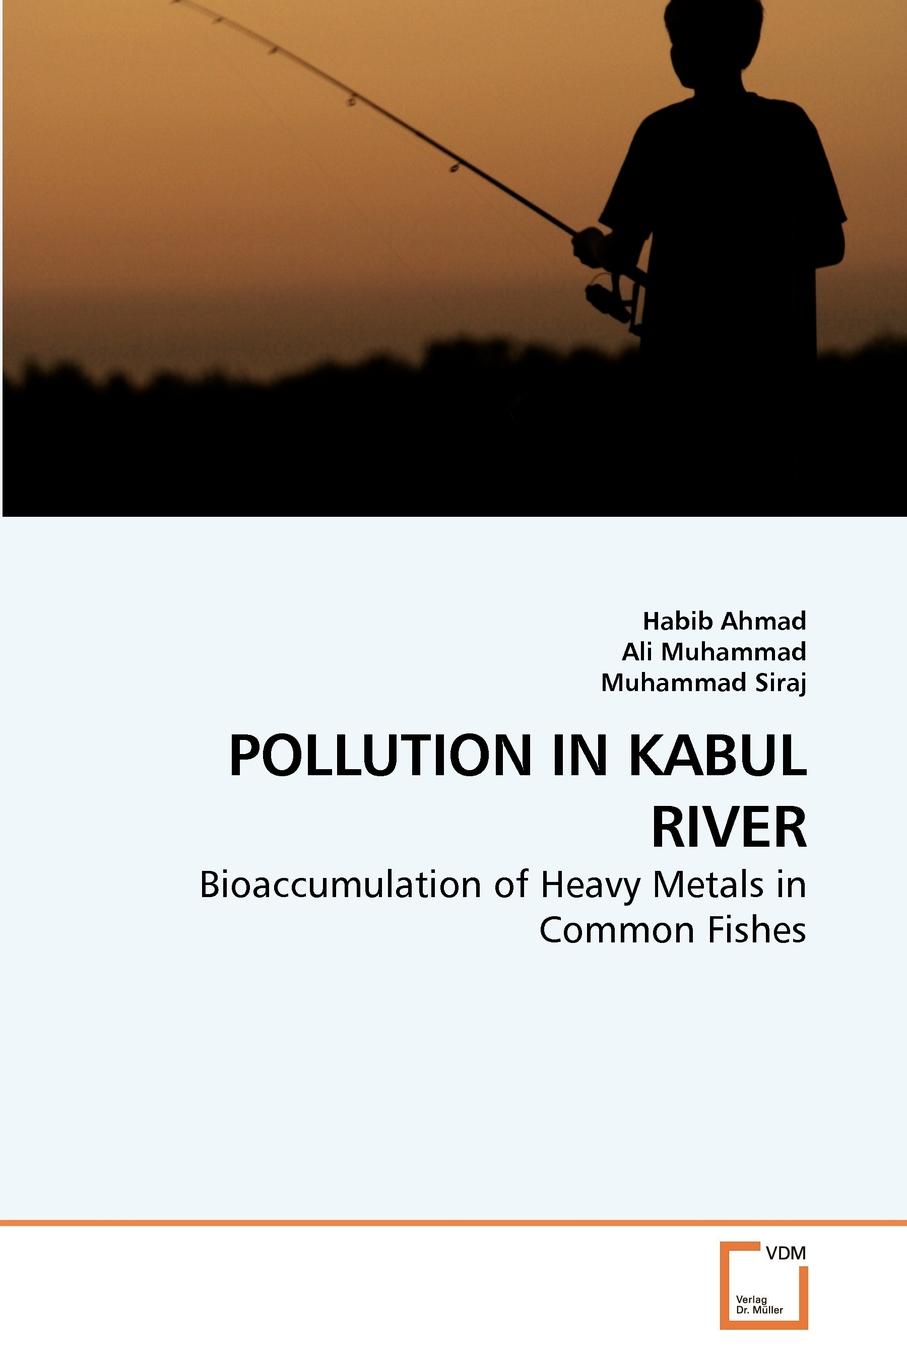 POLLUTION IN KABUL RIVER